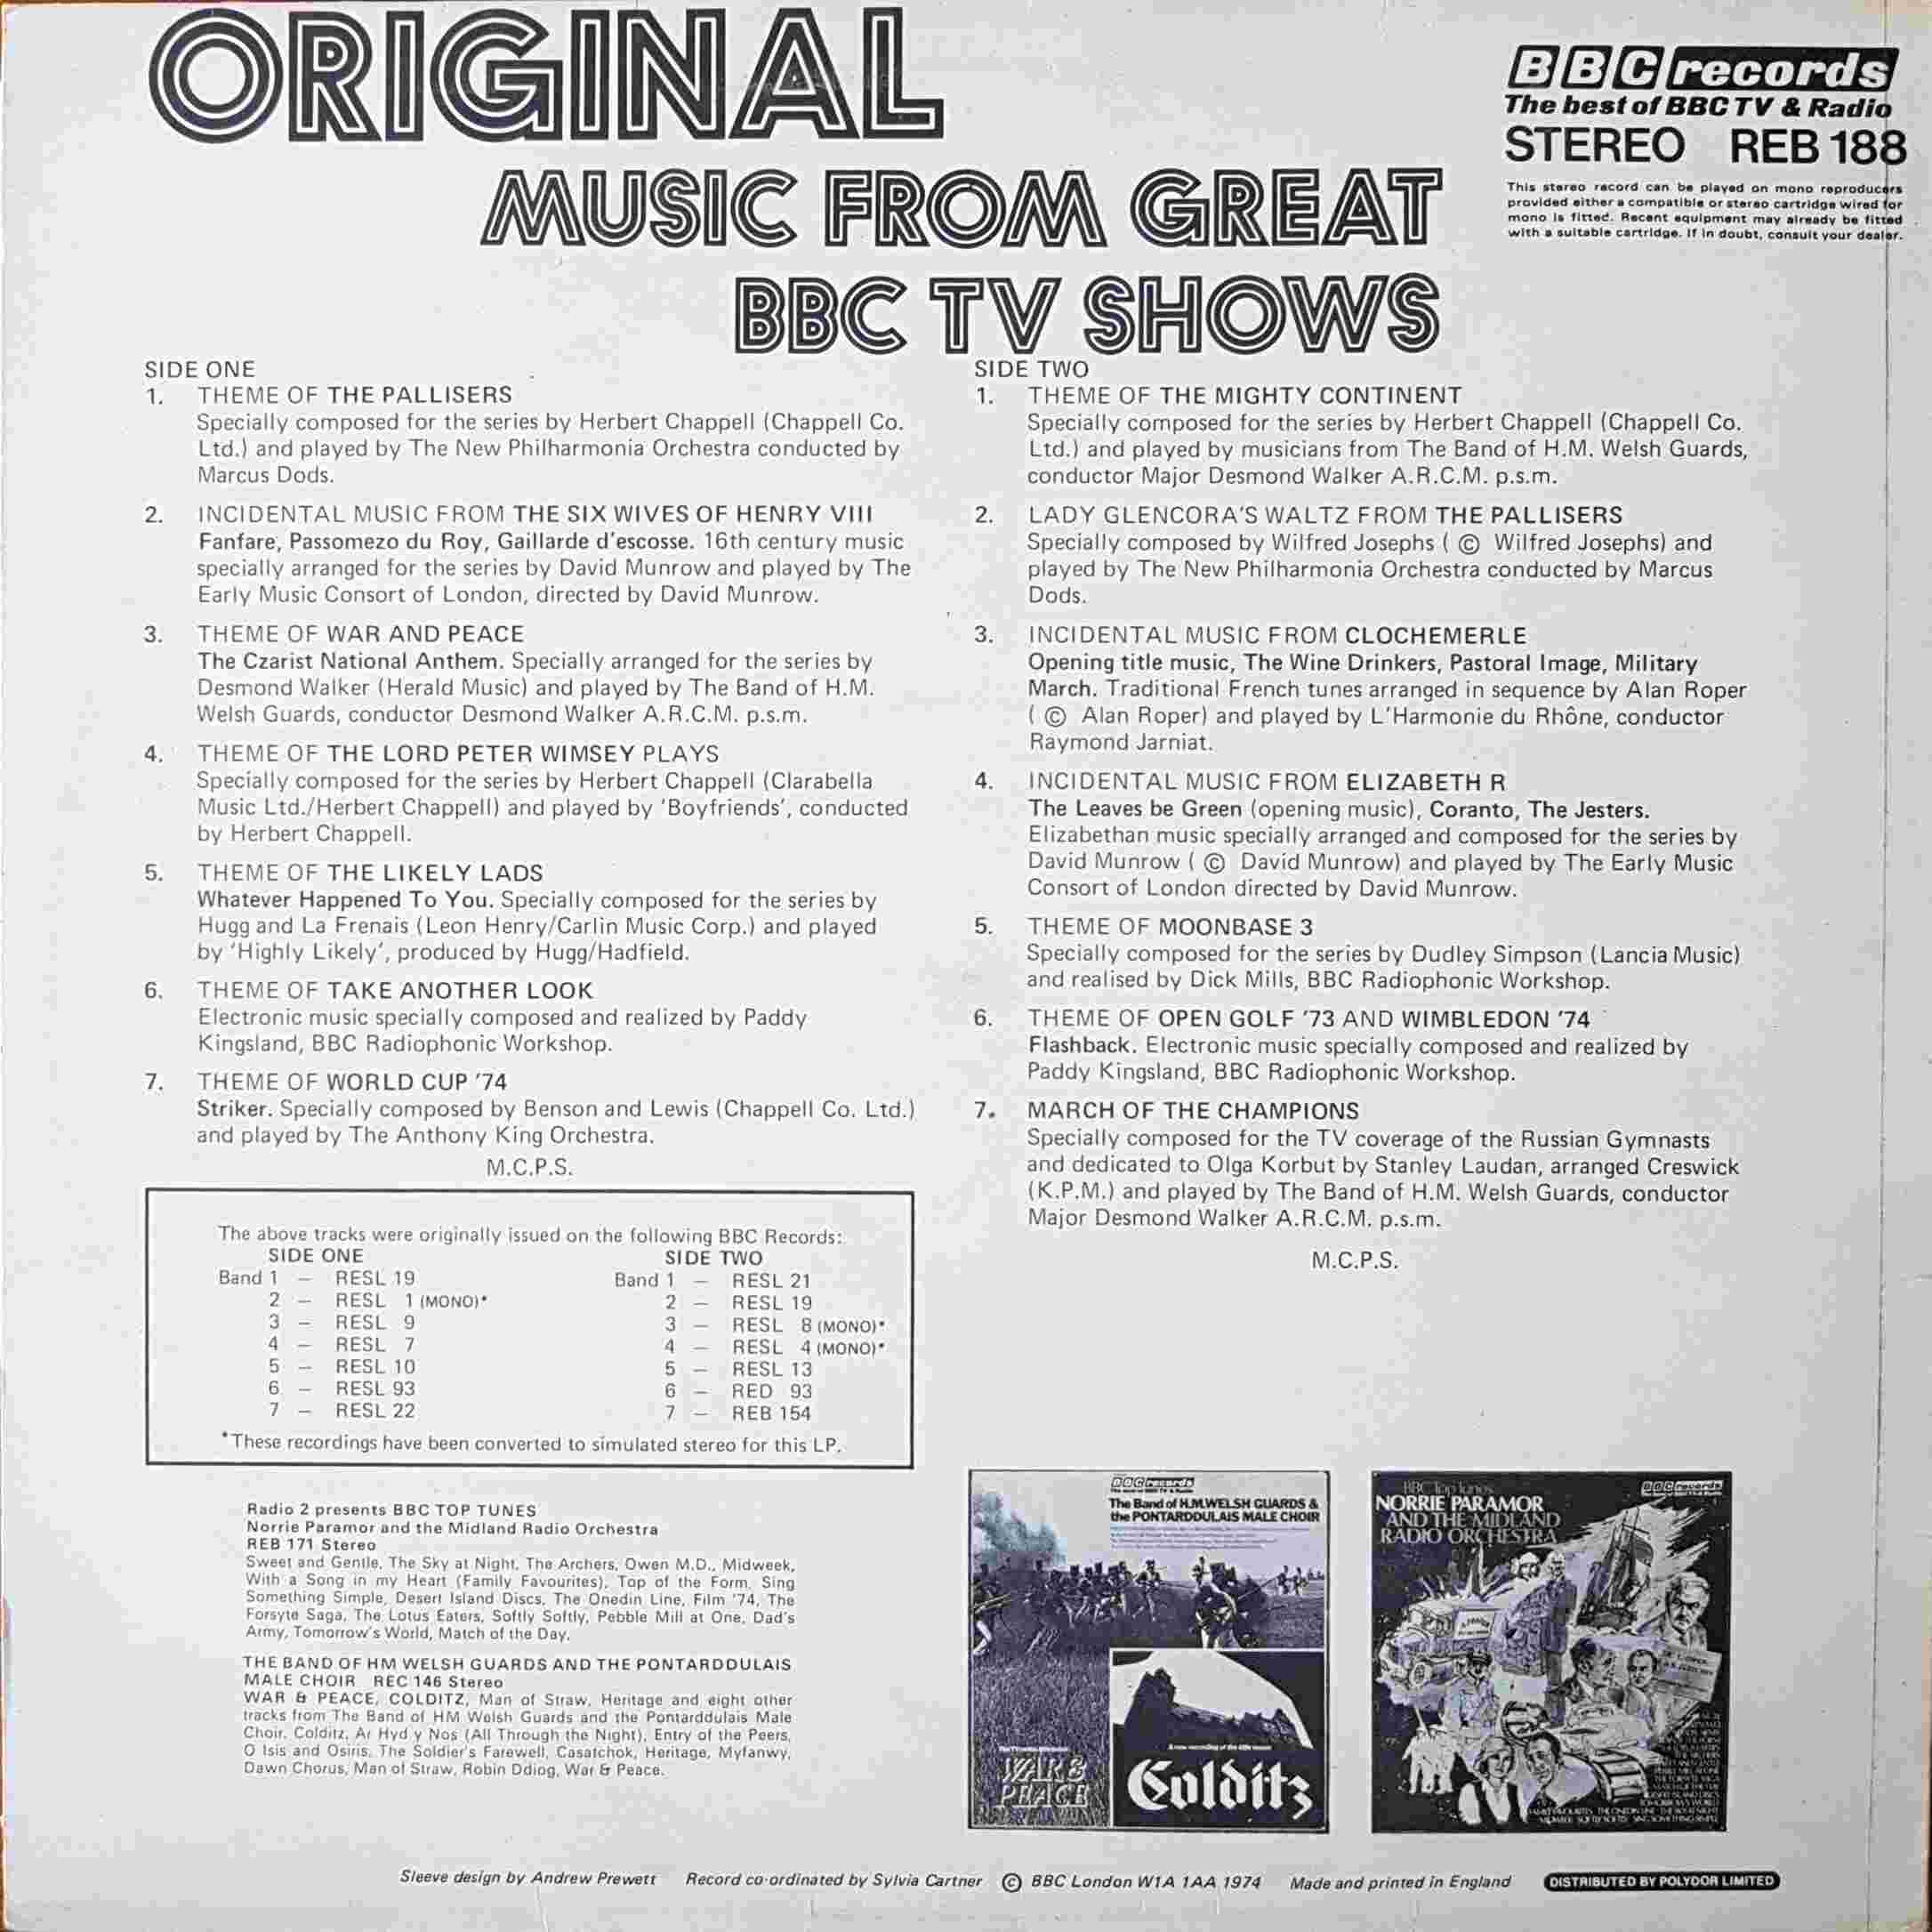 Picture of REB 188 Original music from great BBC - TV shows by artist Various from the BBC records and Tapes library